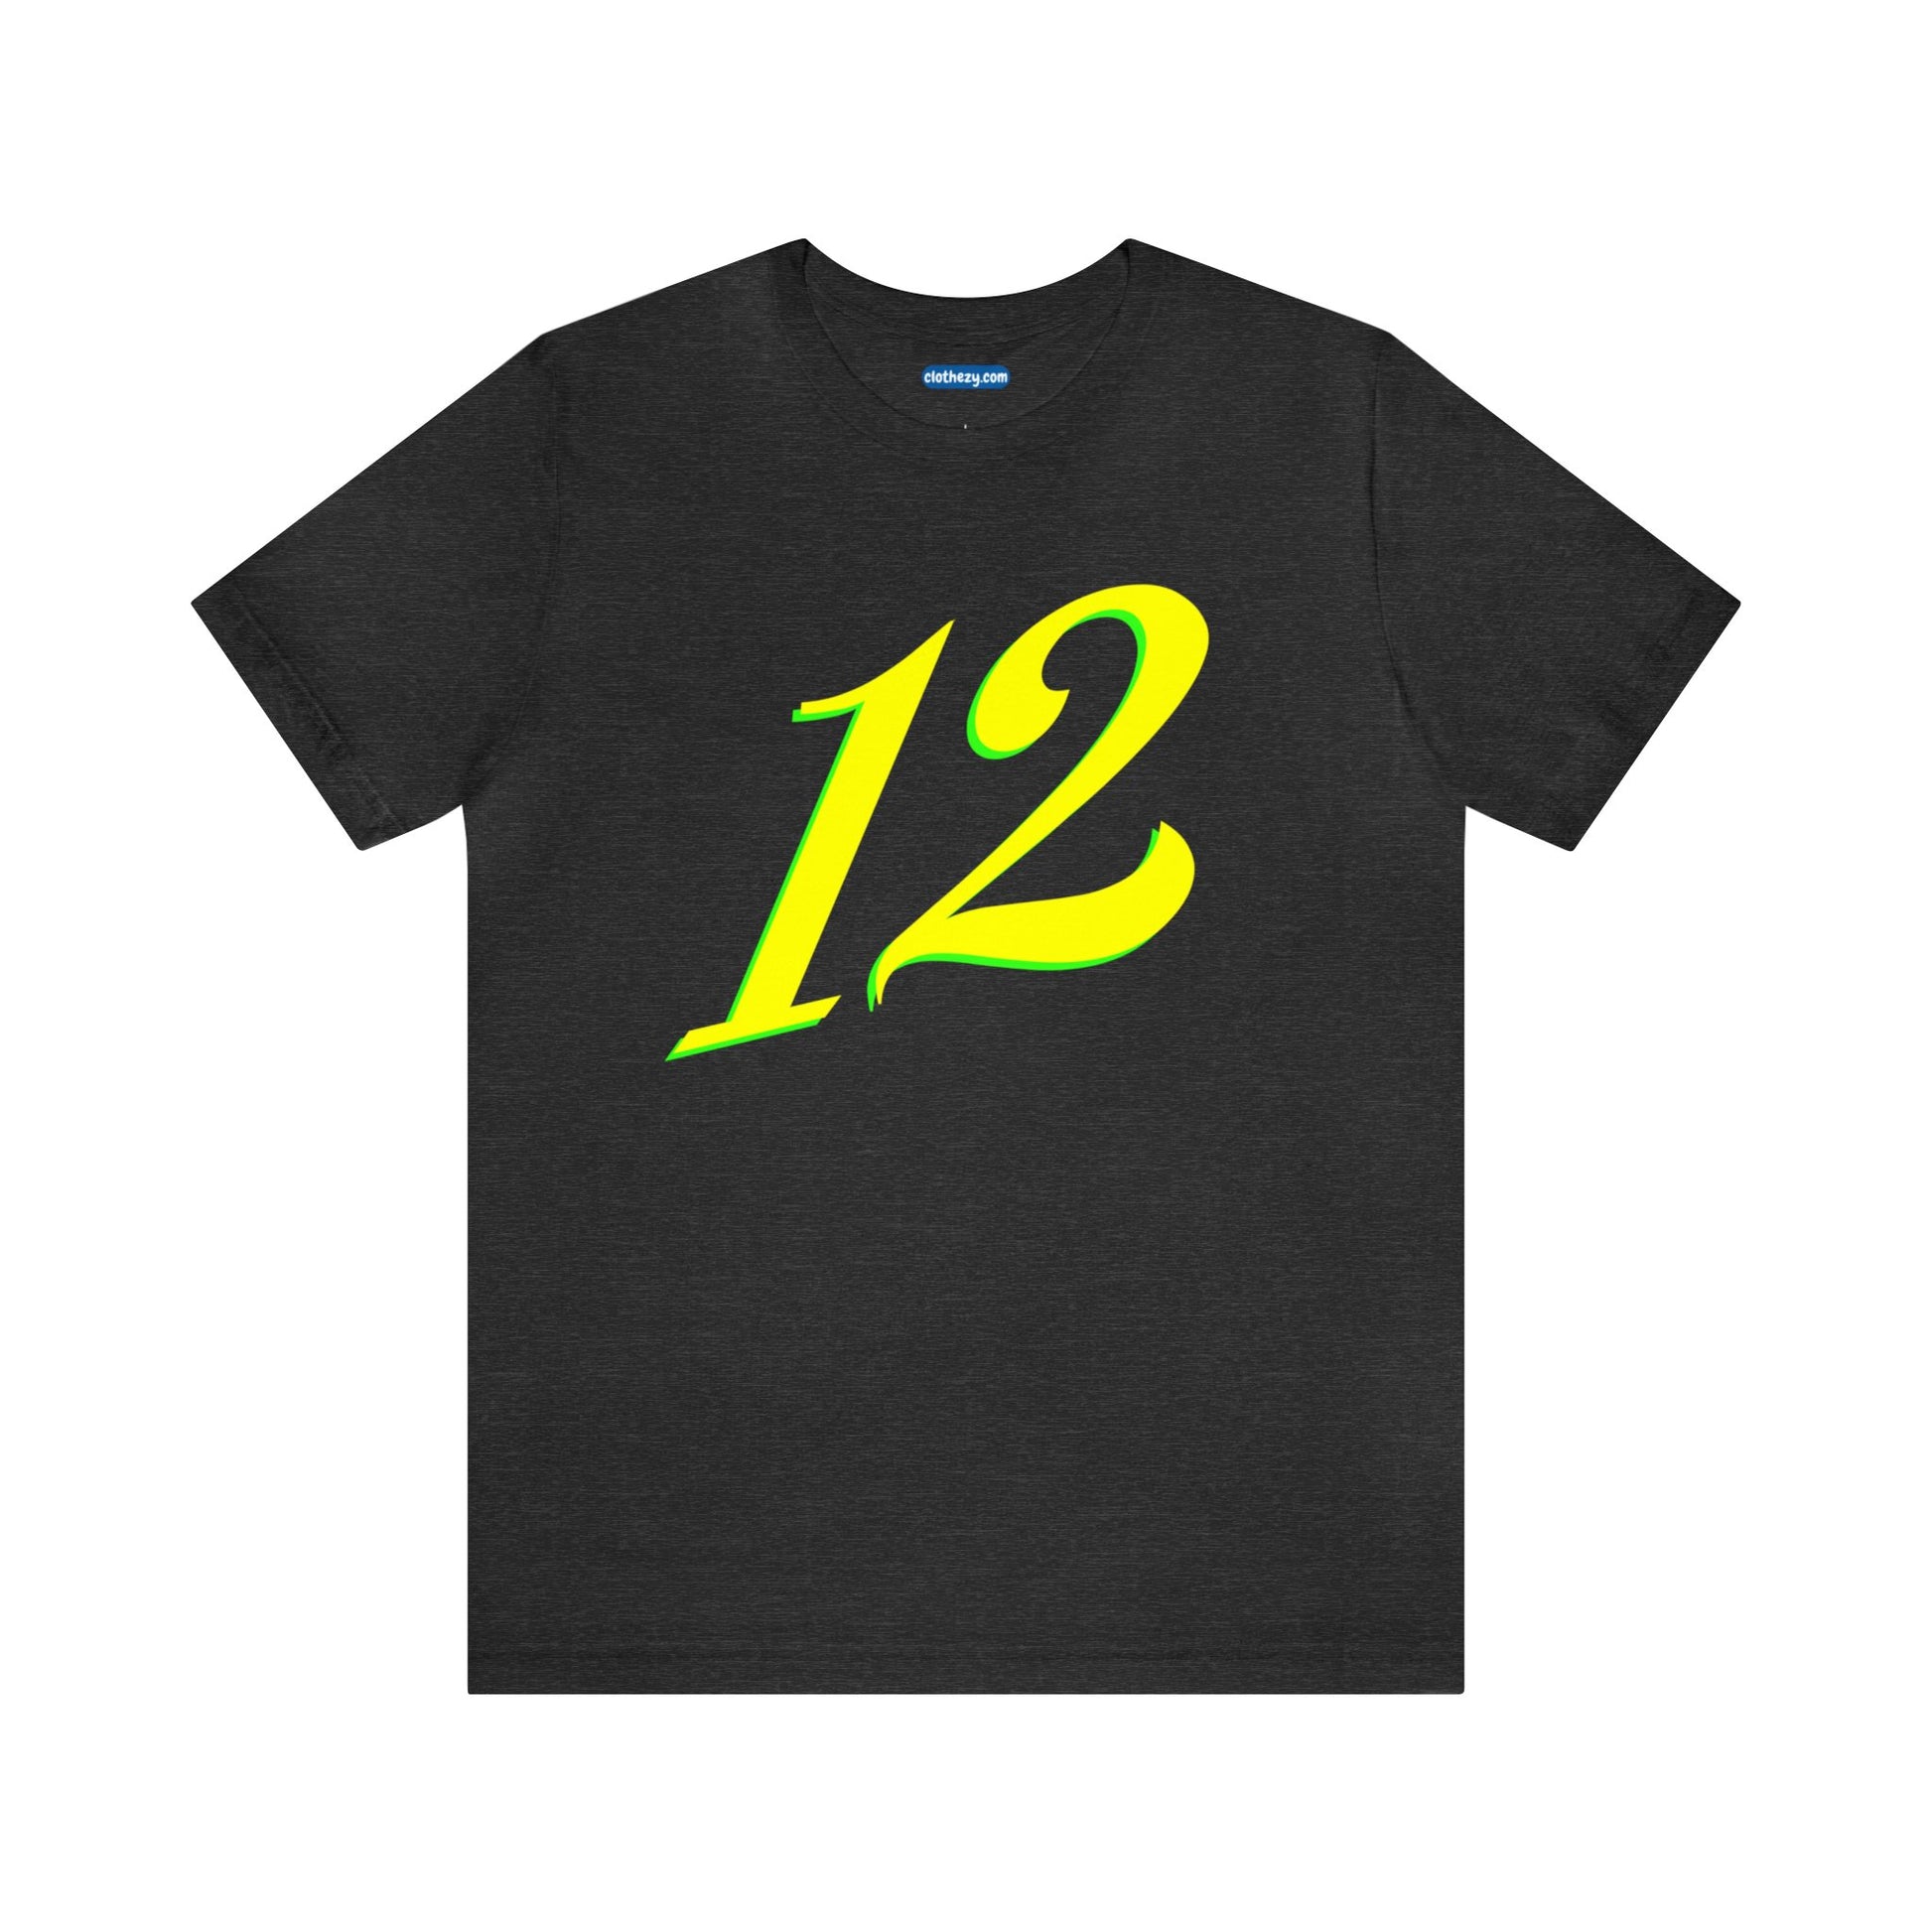 Number 12 Design - Soft Cotton Tee for birthdays and celebrations, Gift for friends and family, Multiple Options by clothezy.com in Gold Size Small - Buy Now